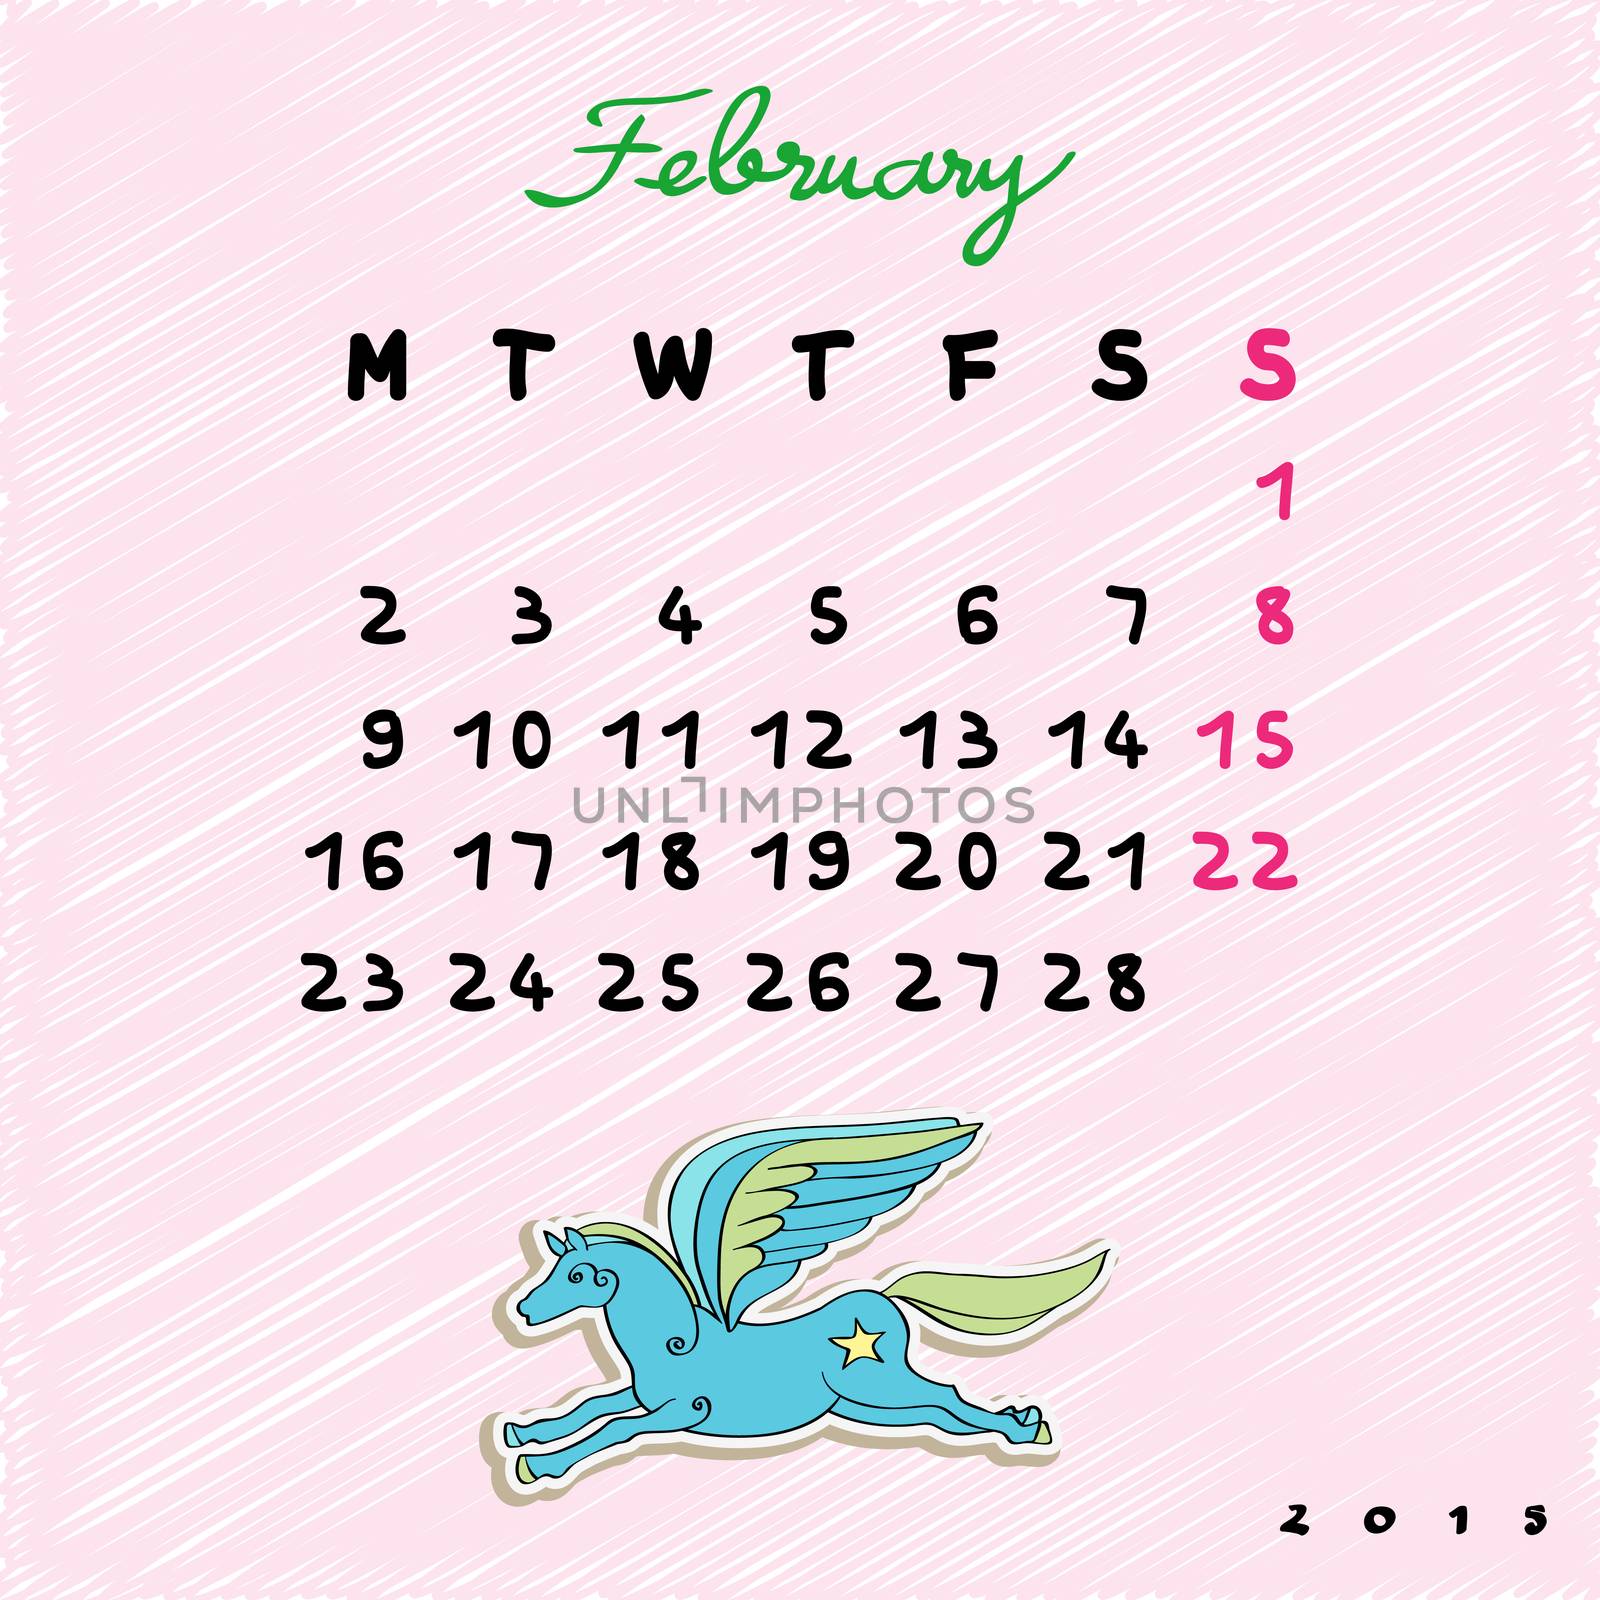 Calendar 2015 with toy horse, graphic illustration of February month calendar with original hand drawn text